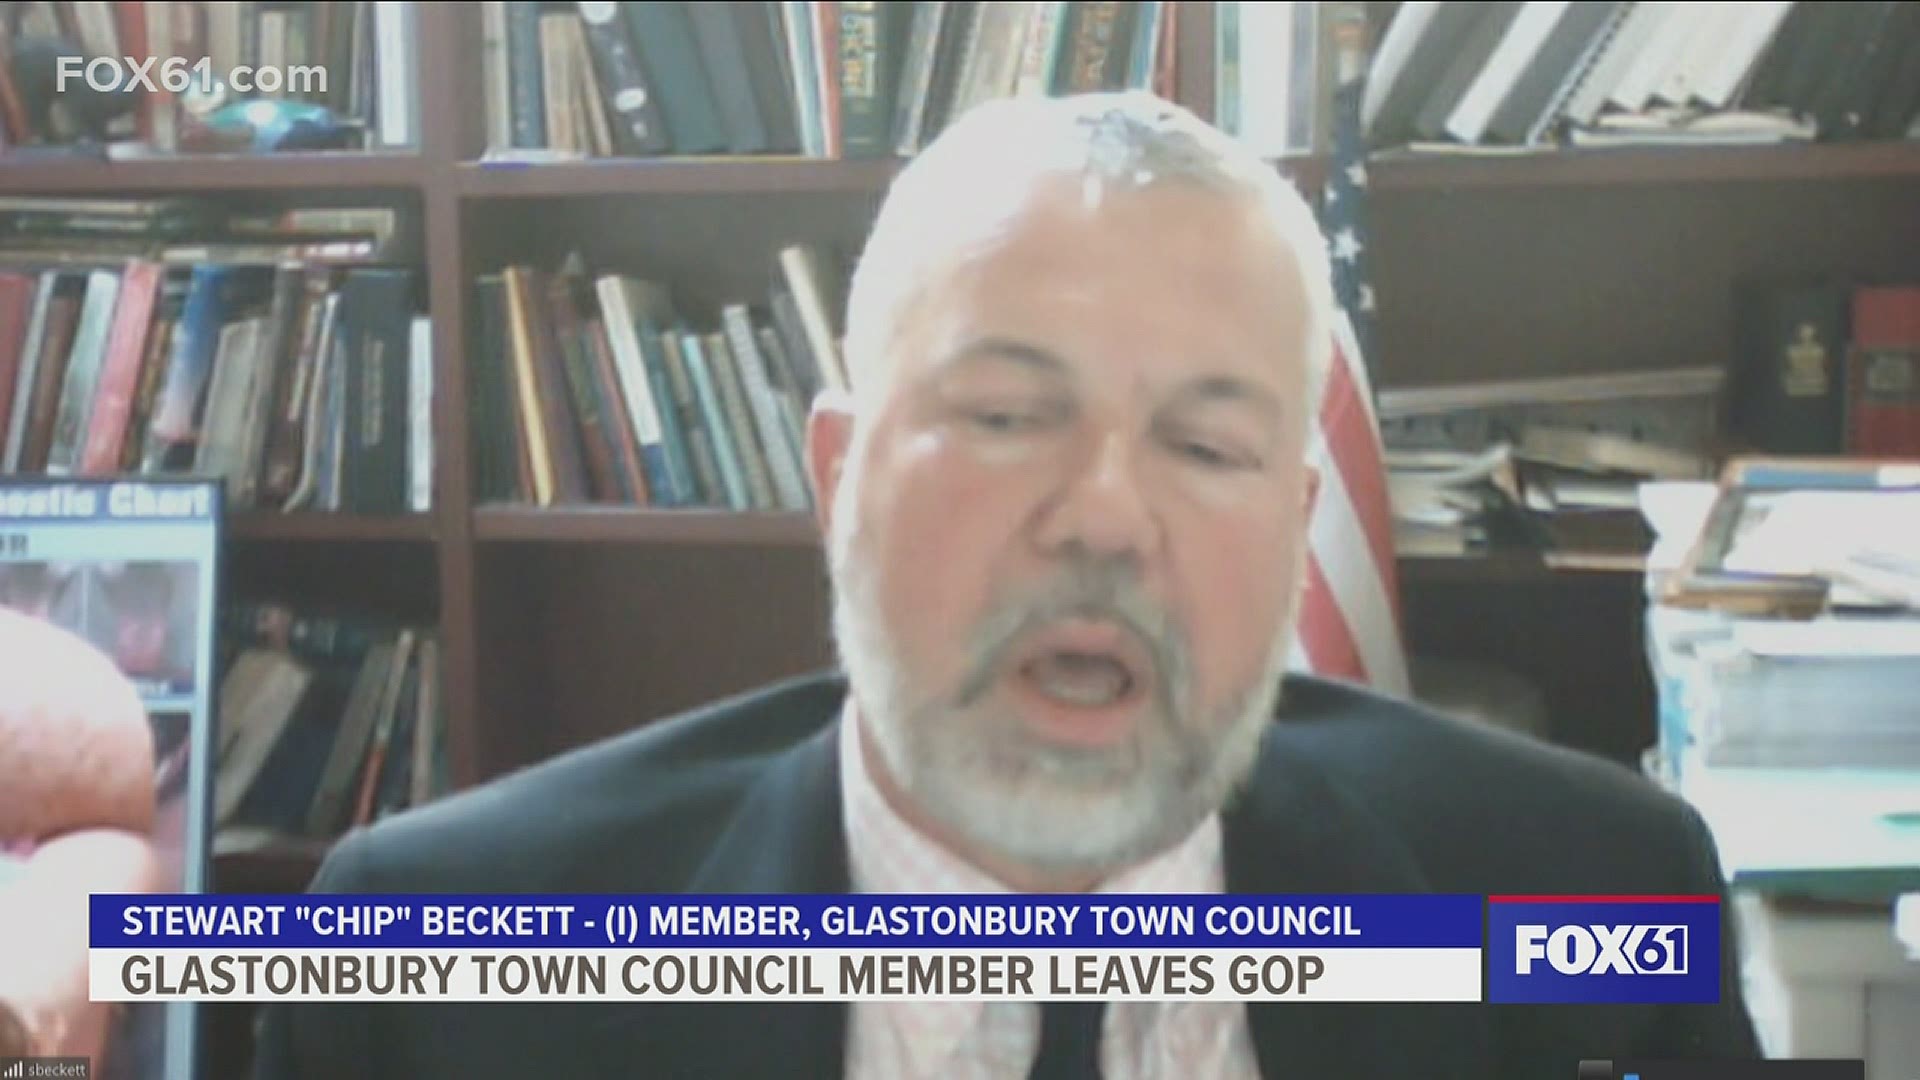 A current Glastonbury Town Council member, Beckett, is joining the GOP exodus.